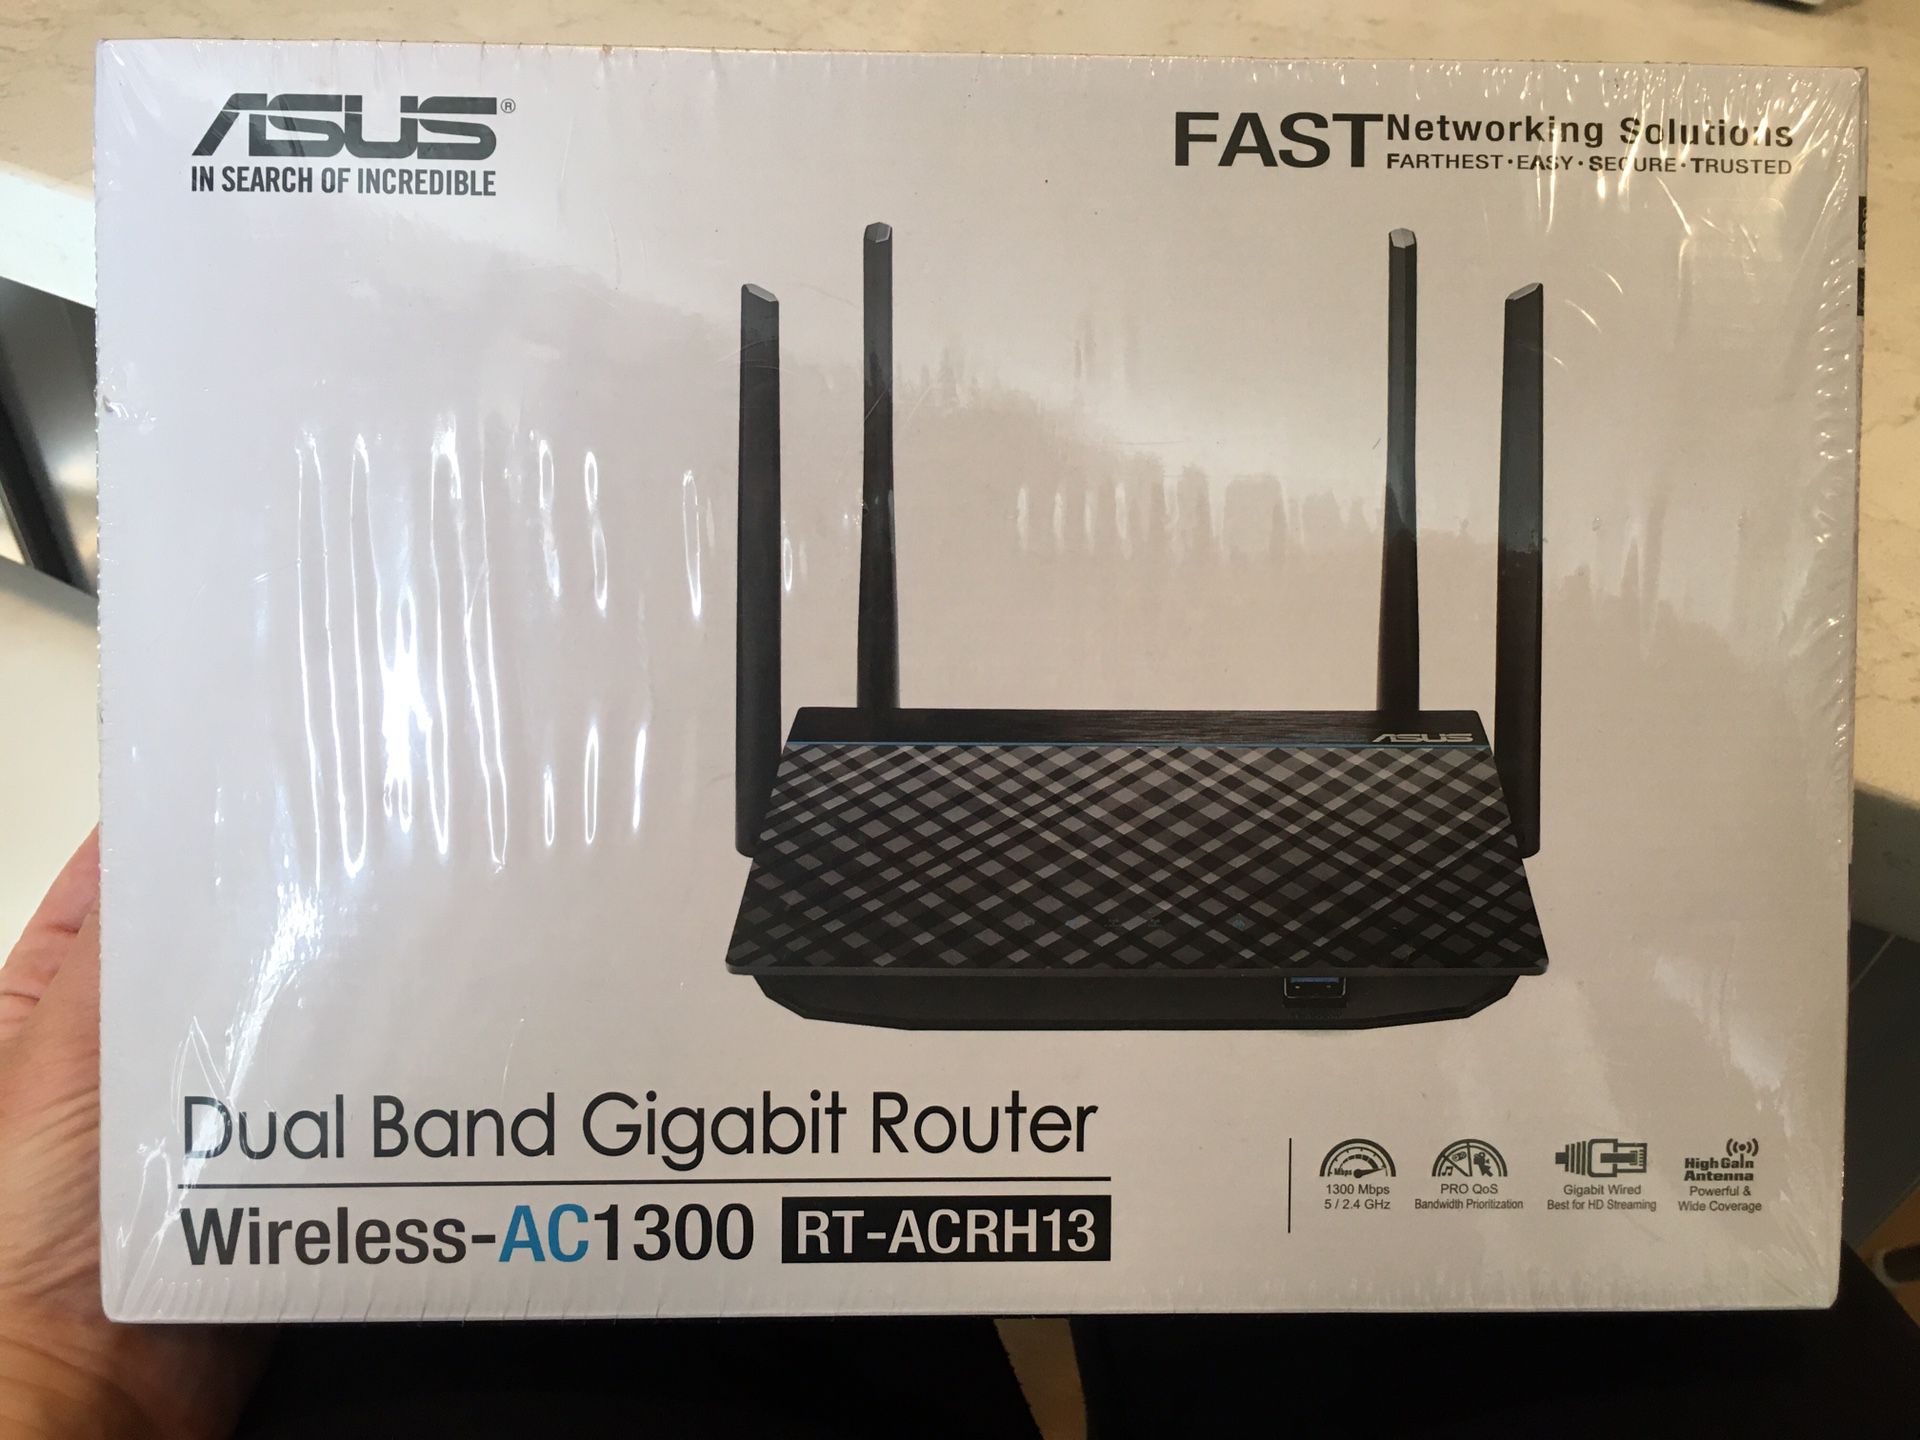 ASUS AC 1300 Wireless Router, Dual Band Gigabit Router